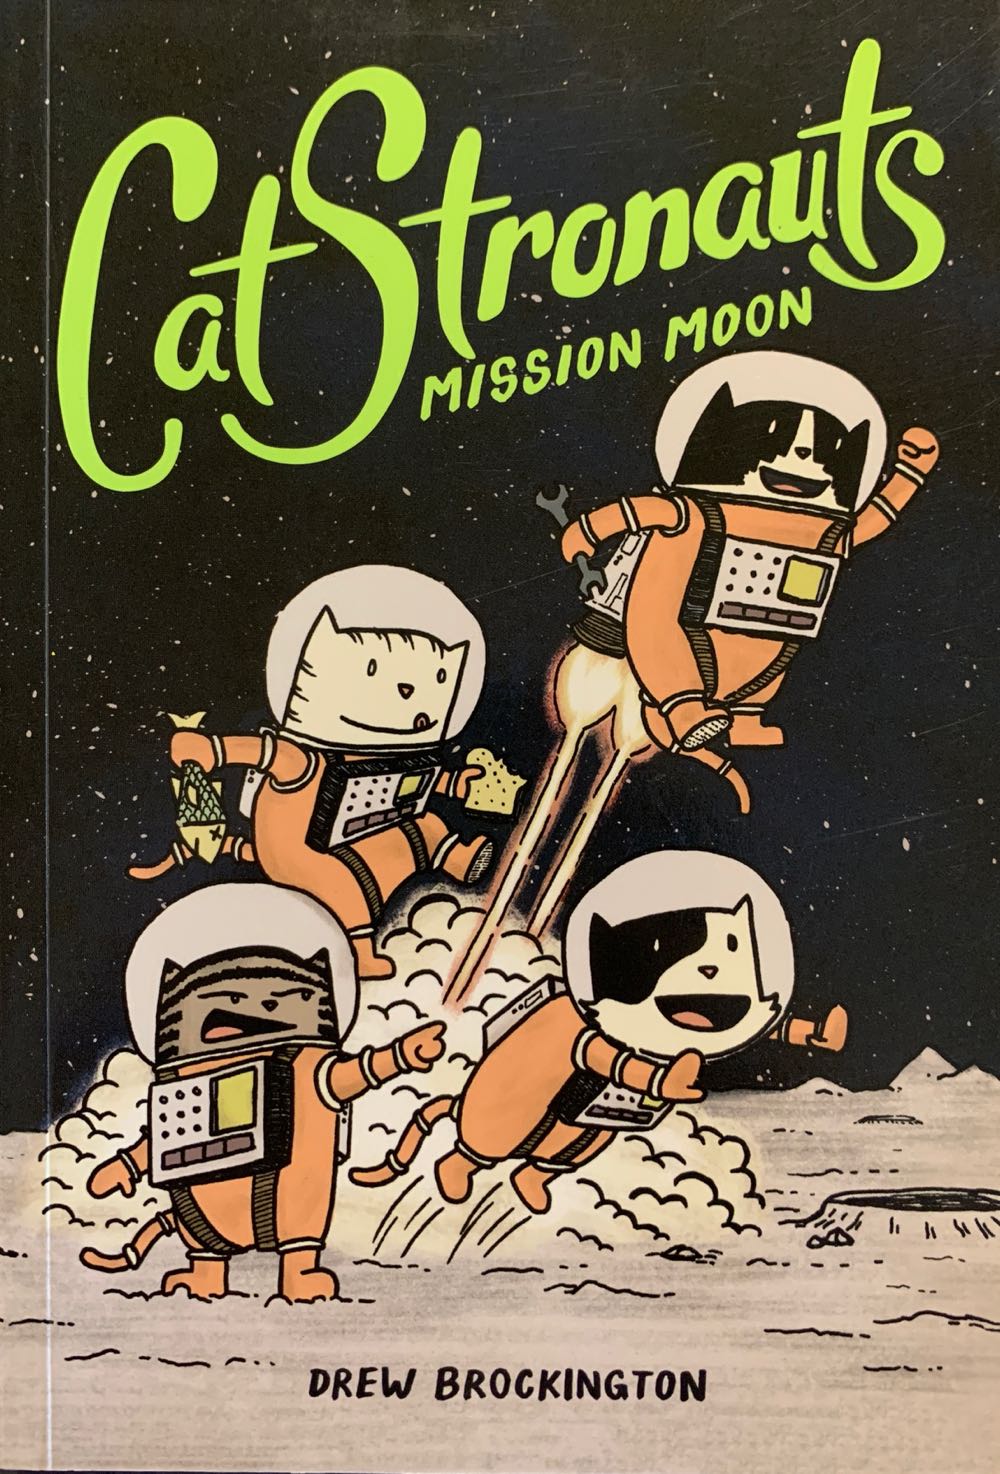 Catstronauts: Mission Moon - Drew Brockington (Little, Brown Books for Young Readers - Paperback) book collectible [Barcode 9780316307451] - Main Image 1